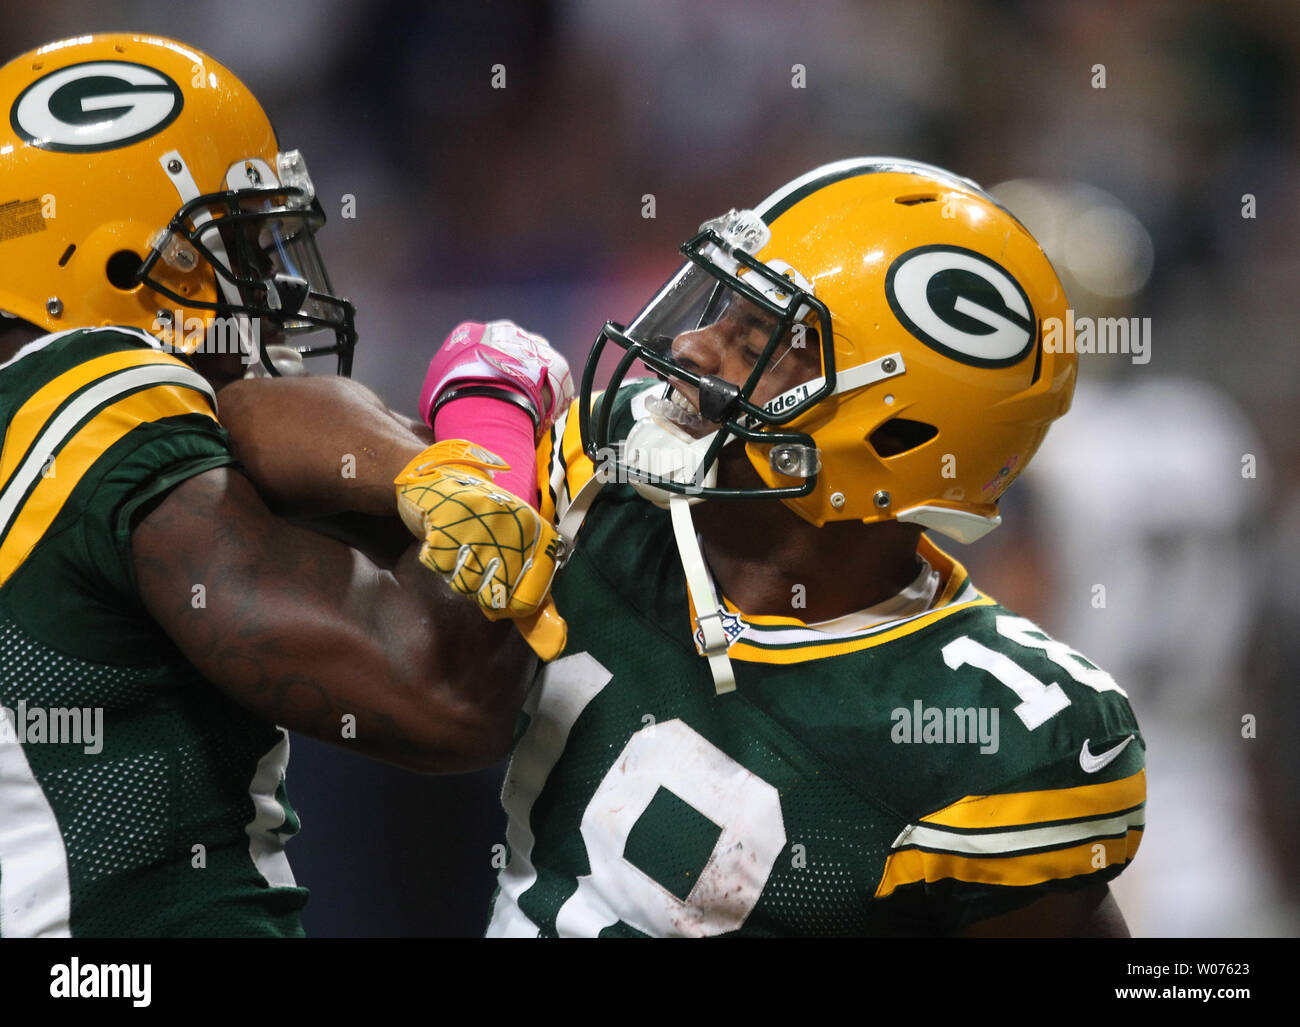 Green Bay Packers James Jones (L) and Randall Cobb lock arms after Cobb caught a touchdown pass in the fourth quarter against the St. Louis Rams at the Edward Jones Dome in St. Louis on October 21, 2012.  Green Bay won the game 30-20.     UPI/Bill Greenblatt Stock Photo